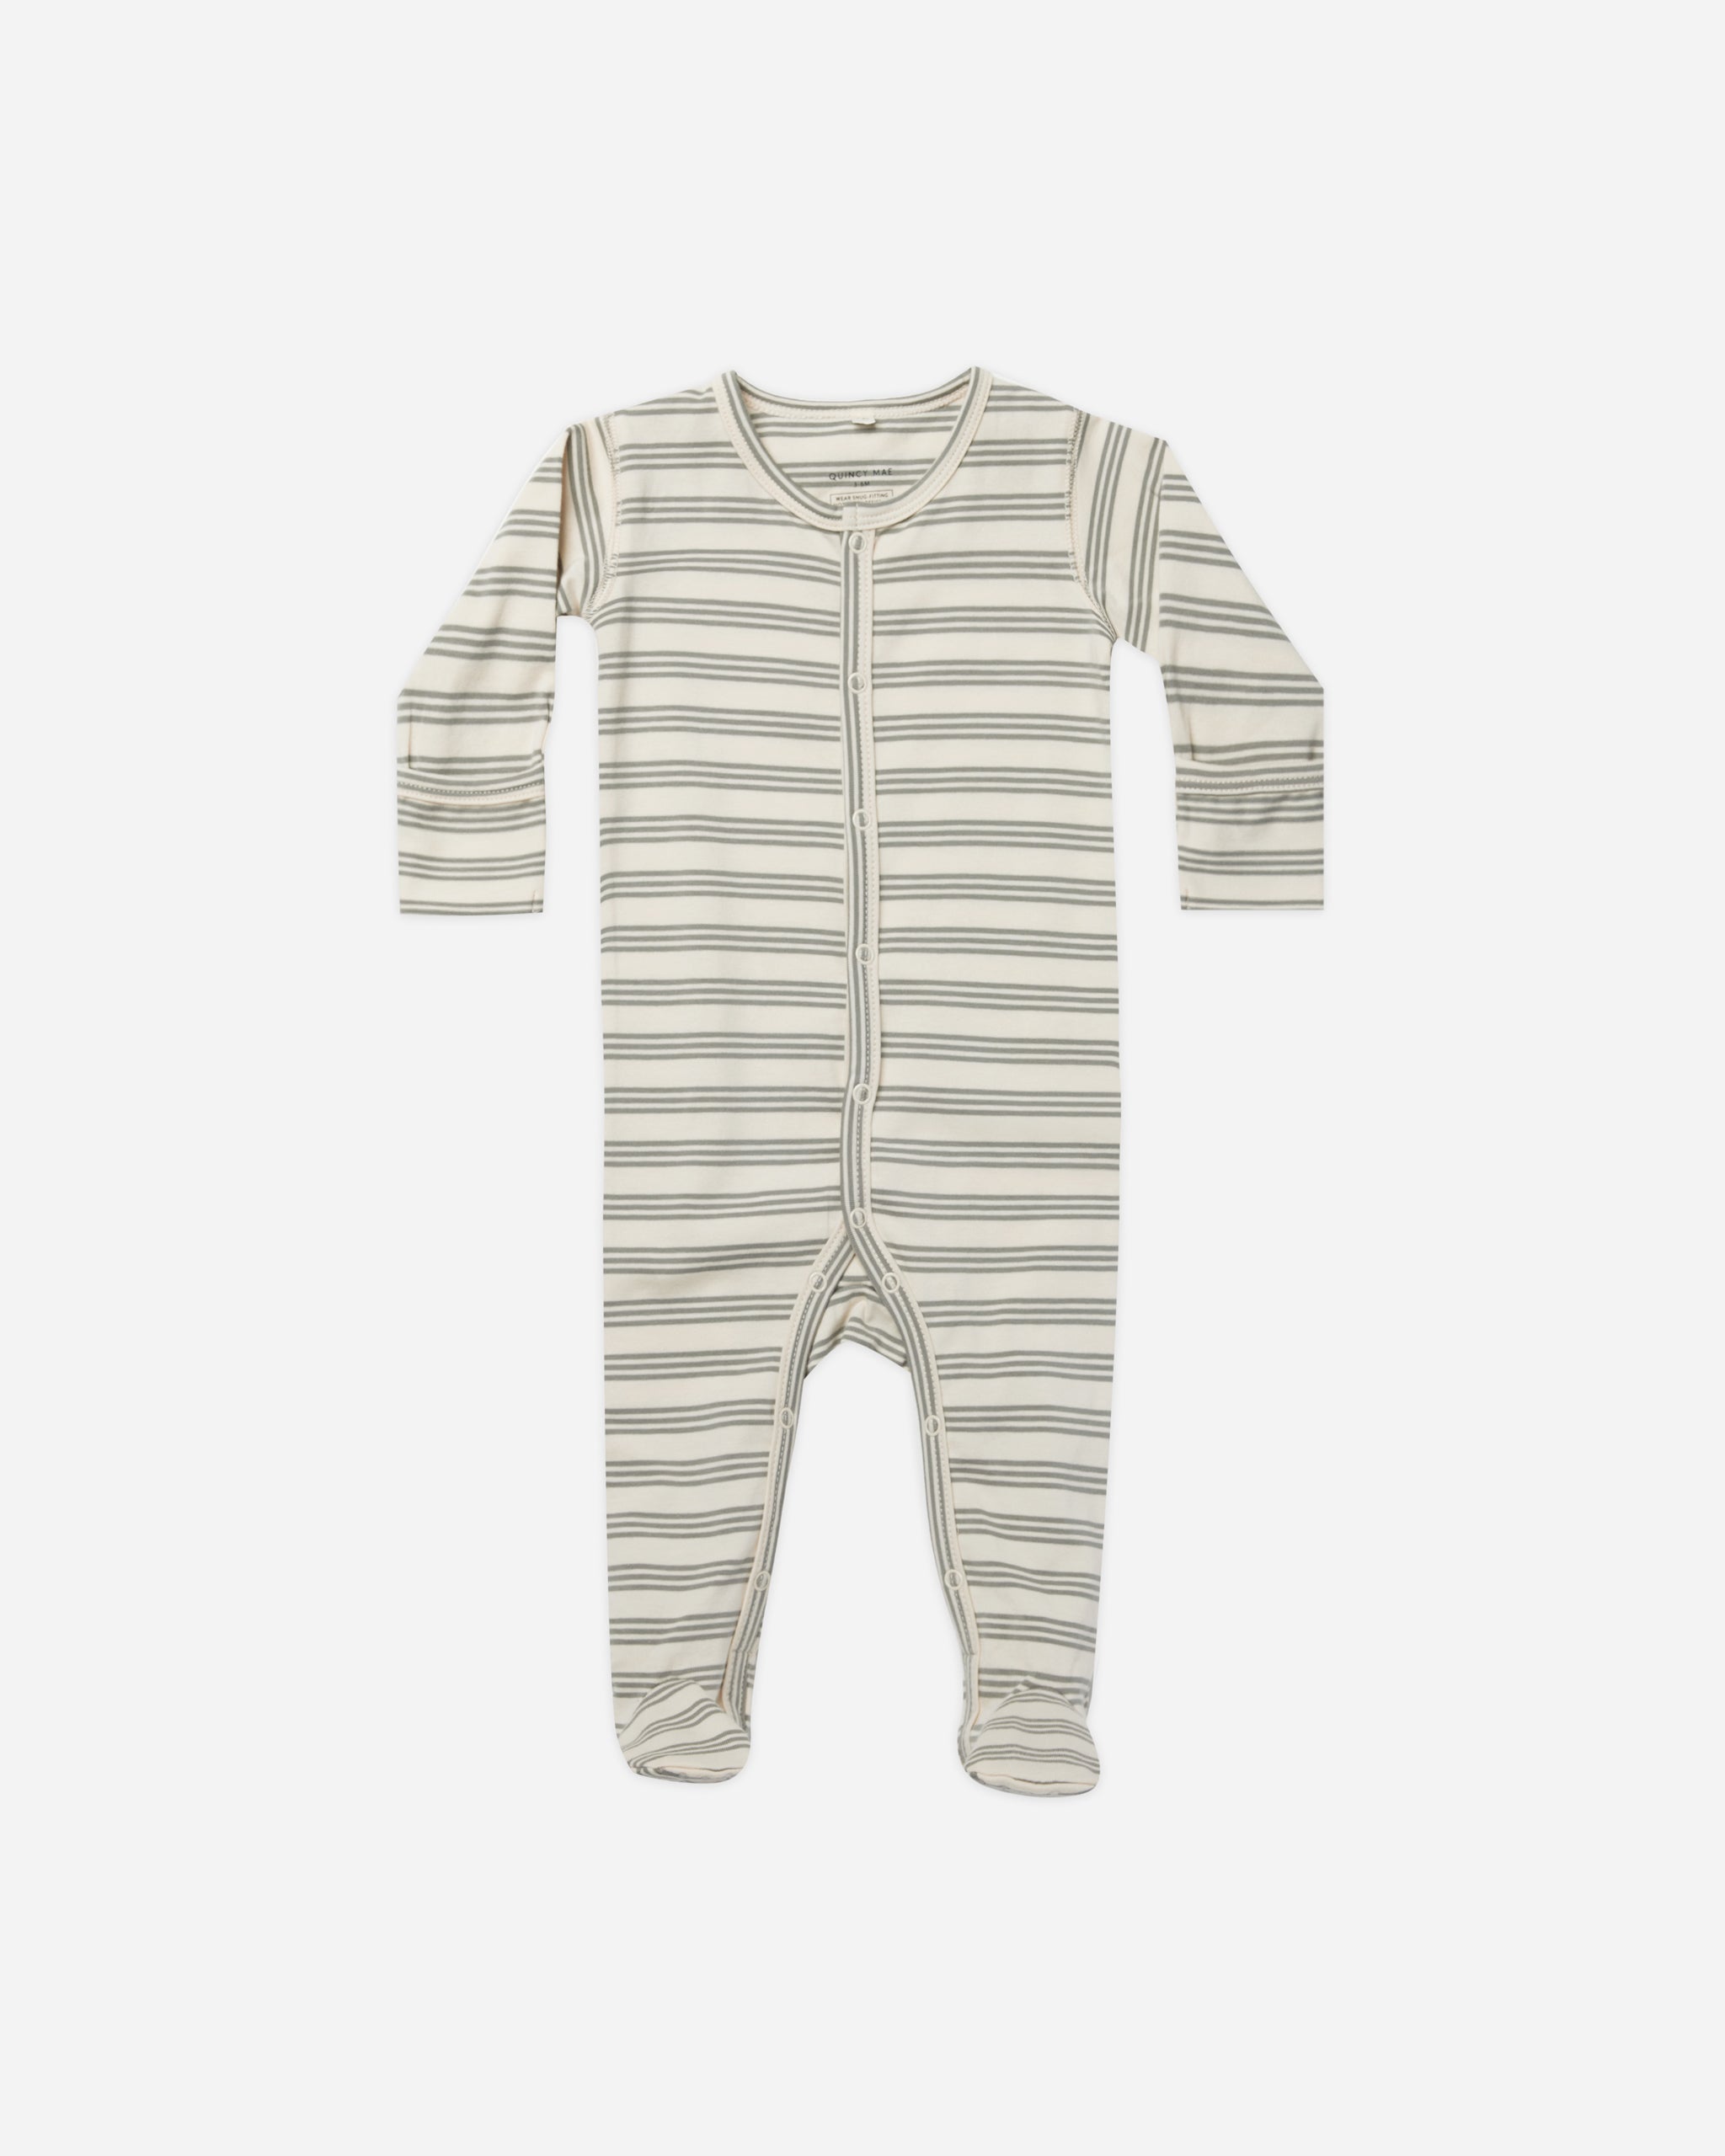 Full Snap Footie || Basil Stripe - Rylee + Cru | Kids Clothes | Trendy Baby Clothes | Modern Infant Outfits |